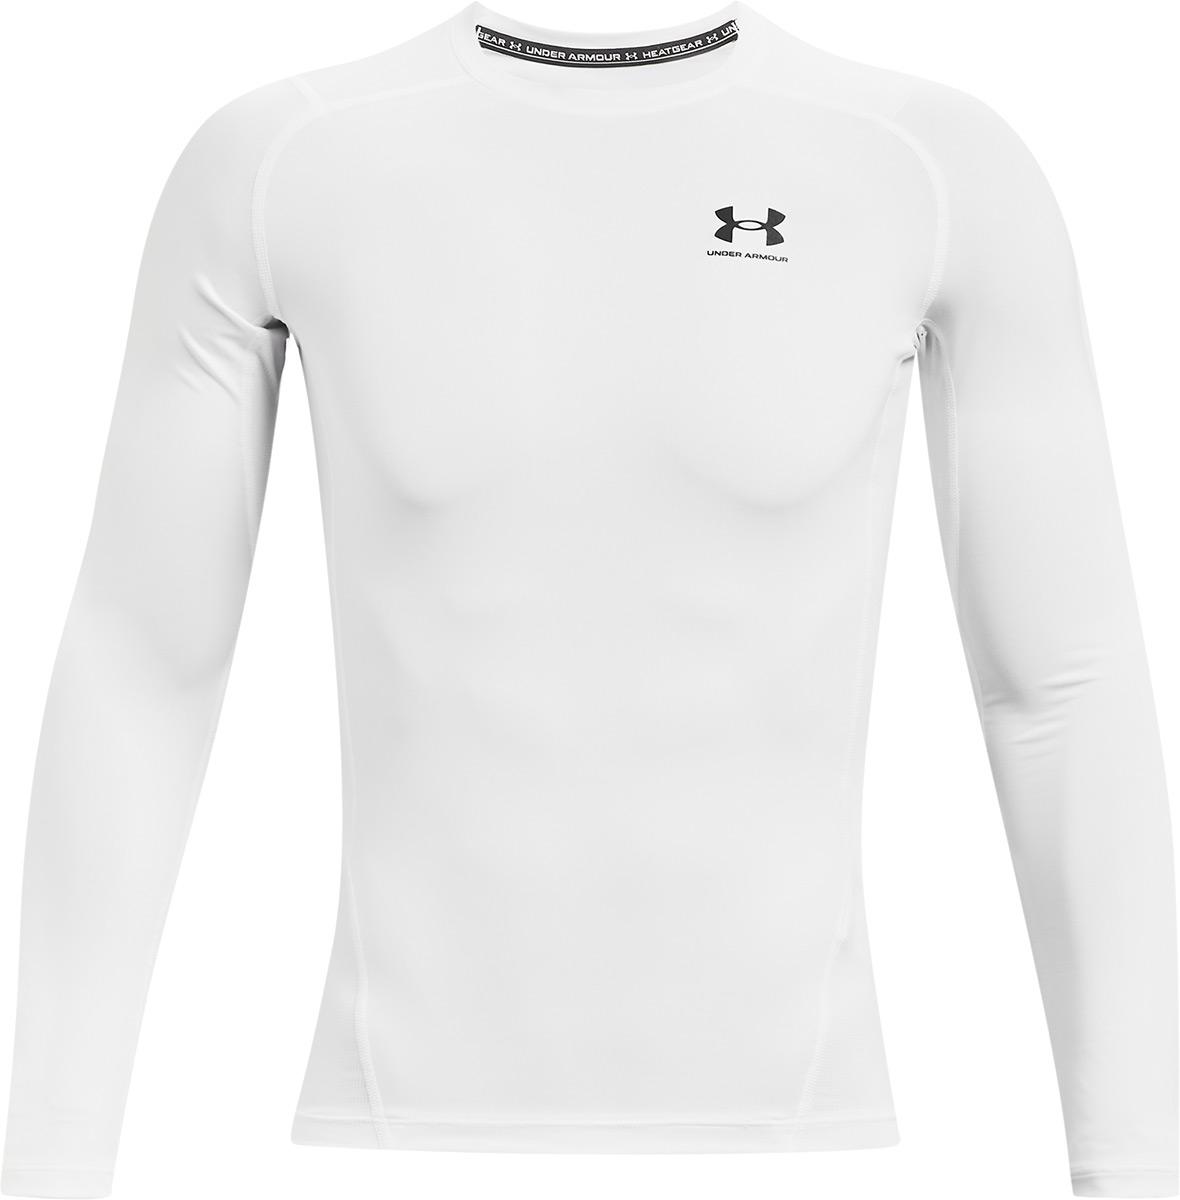 Under Armour Heatgear Armour Long Sleeve Compression Top - White/black